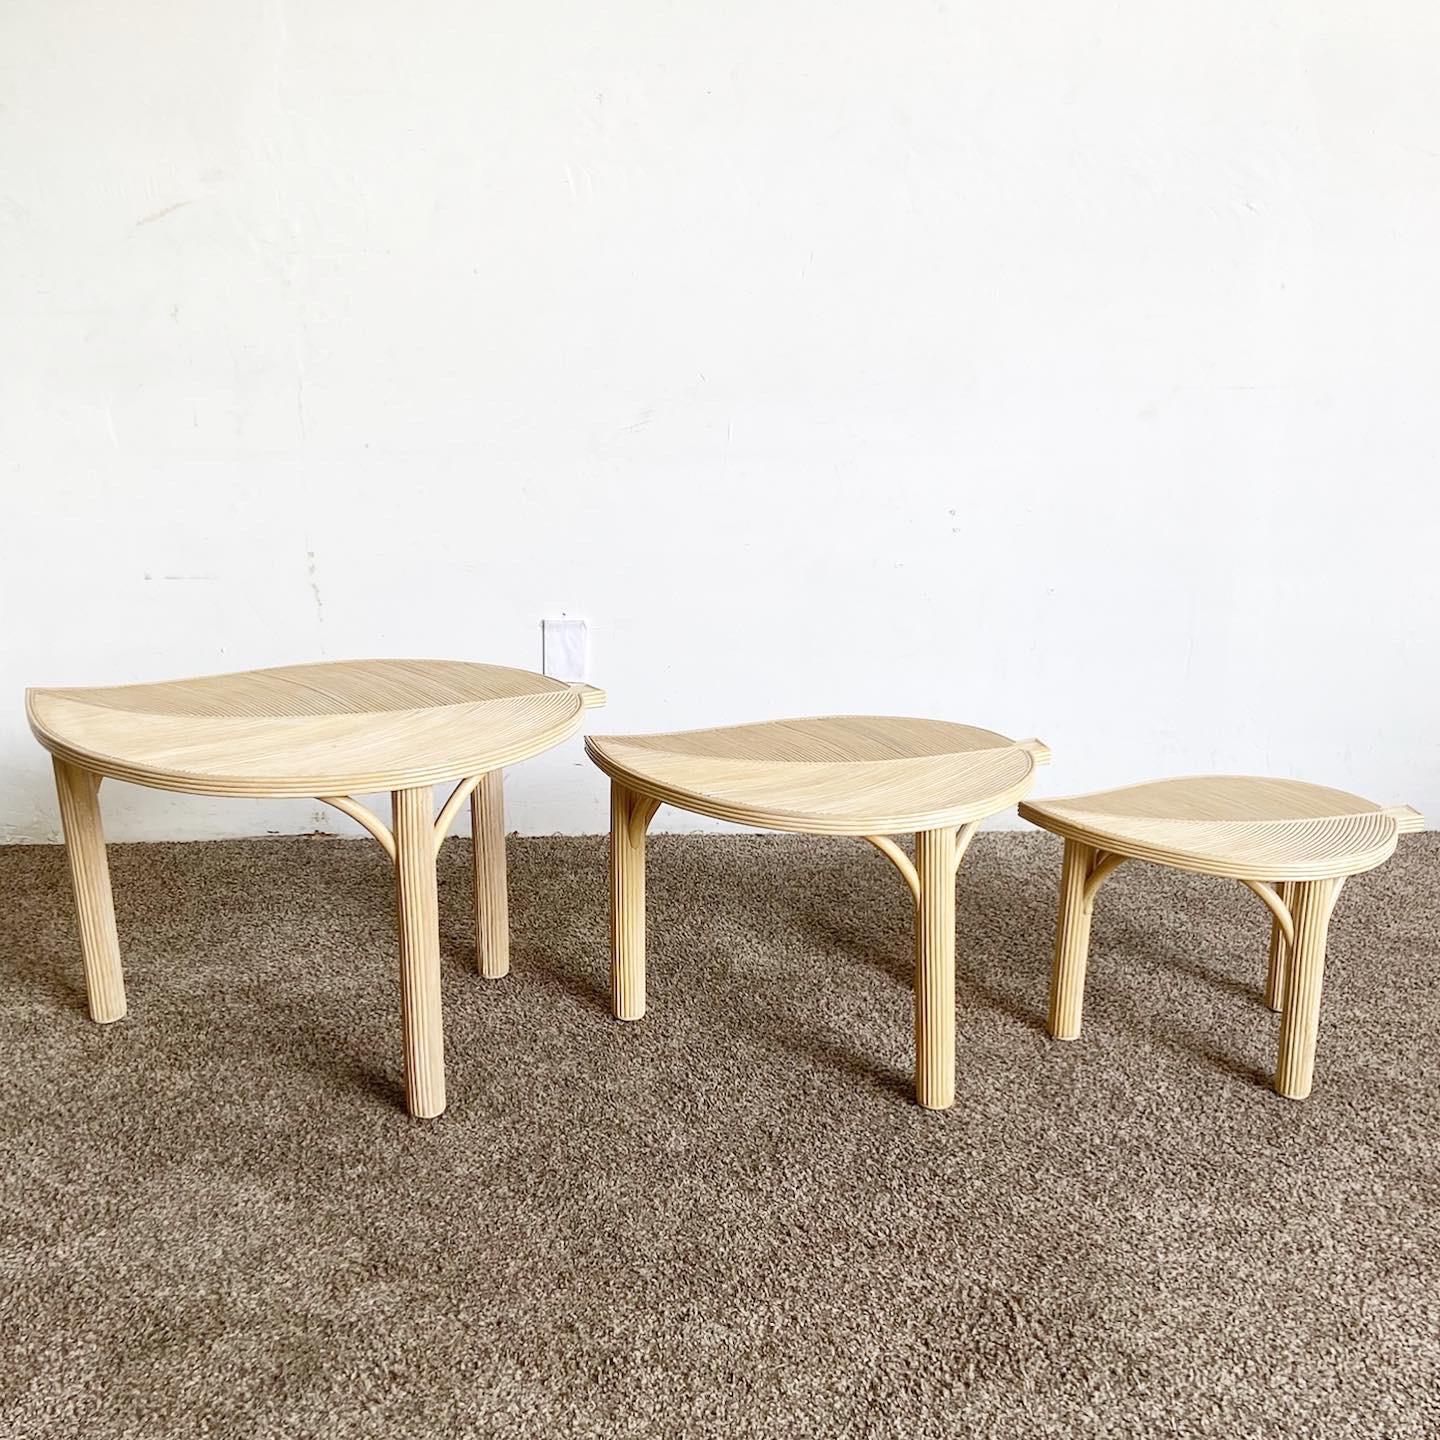 Philippine Boho Chic Pencil Reed Leaf Nesting Tables - Set of 3 For Sale